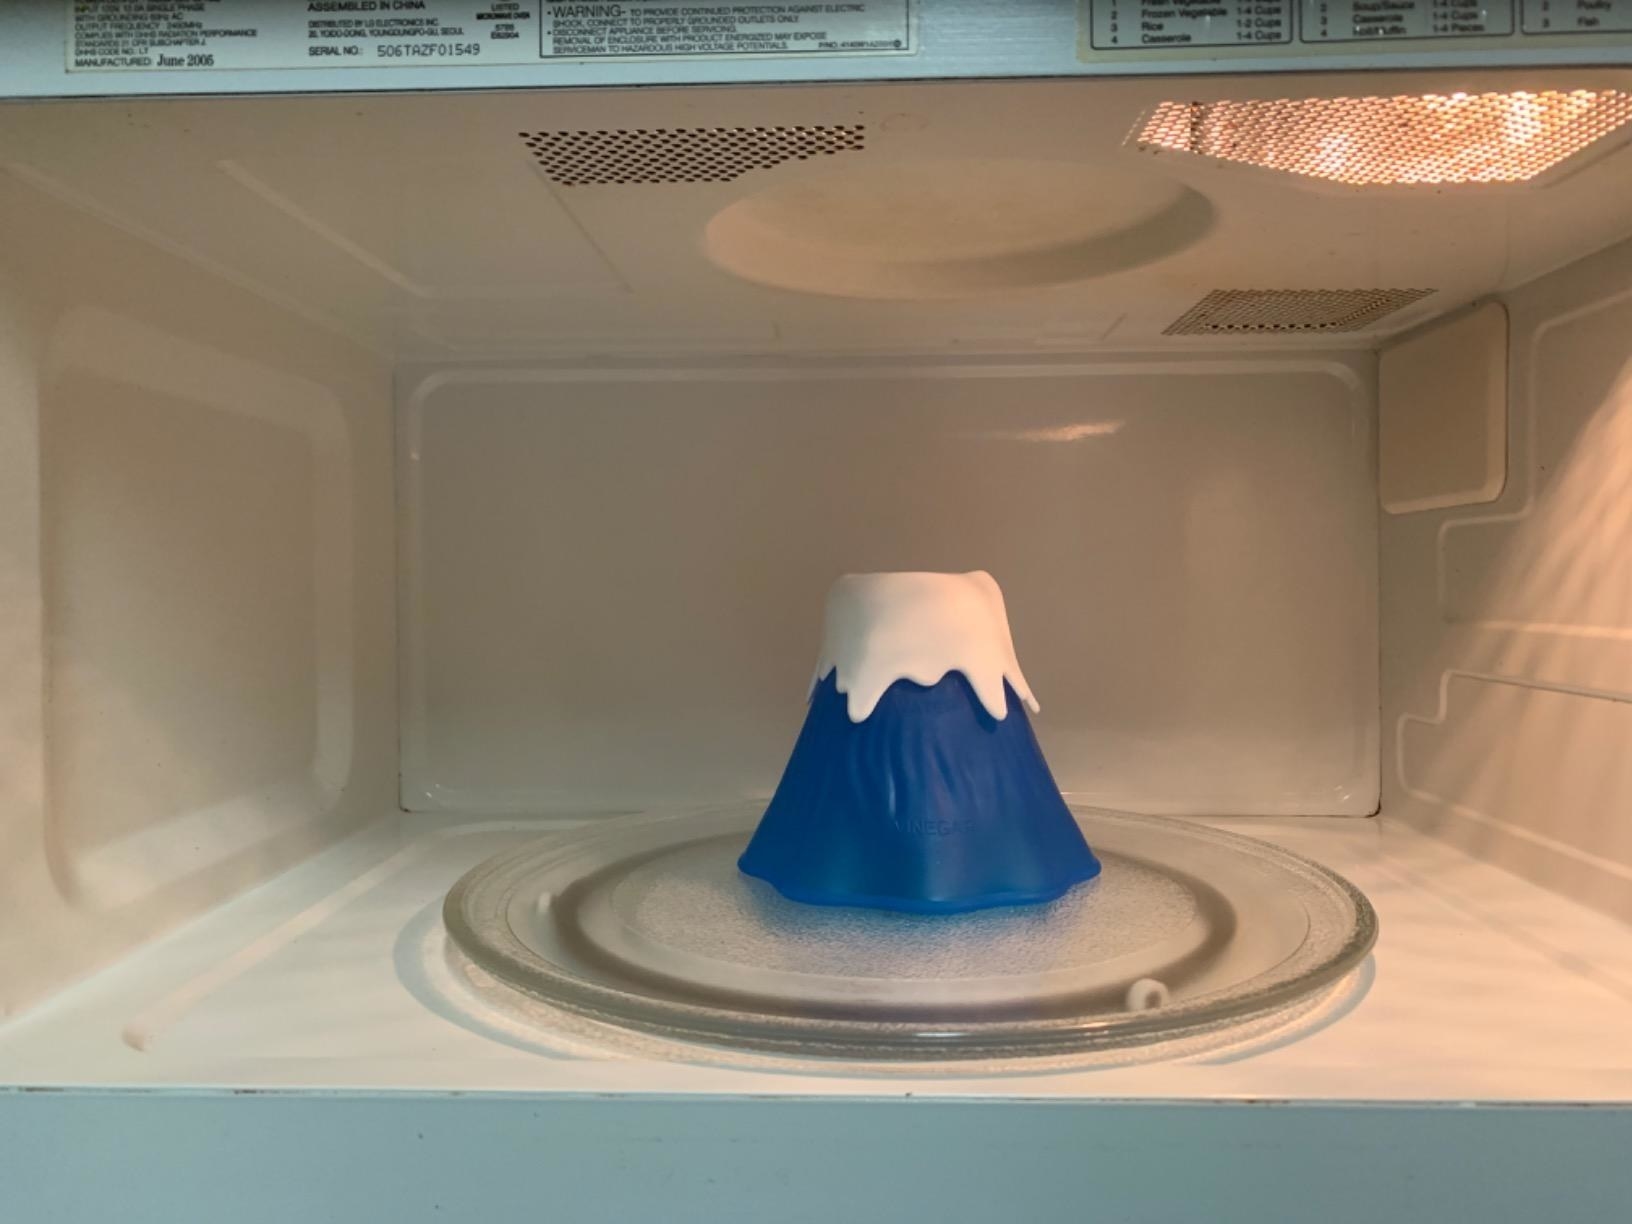 the blue plastic volcano in a microwave